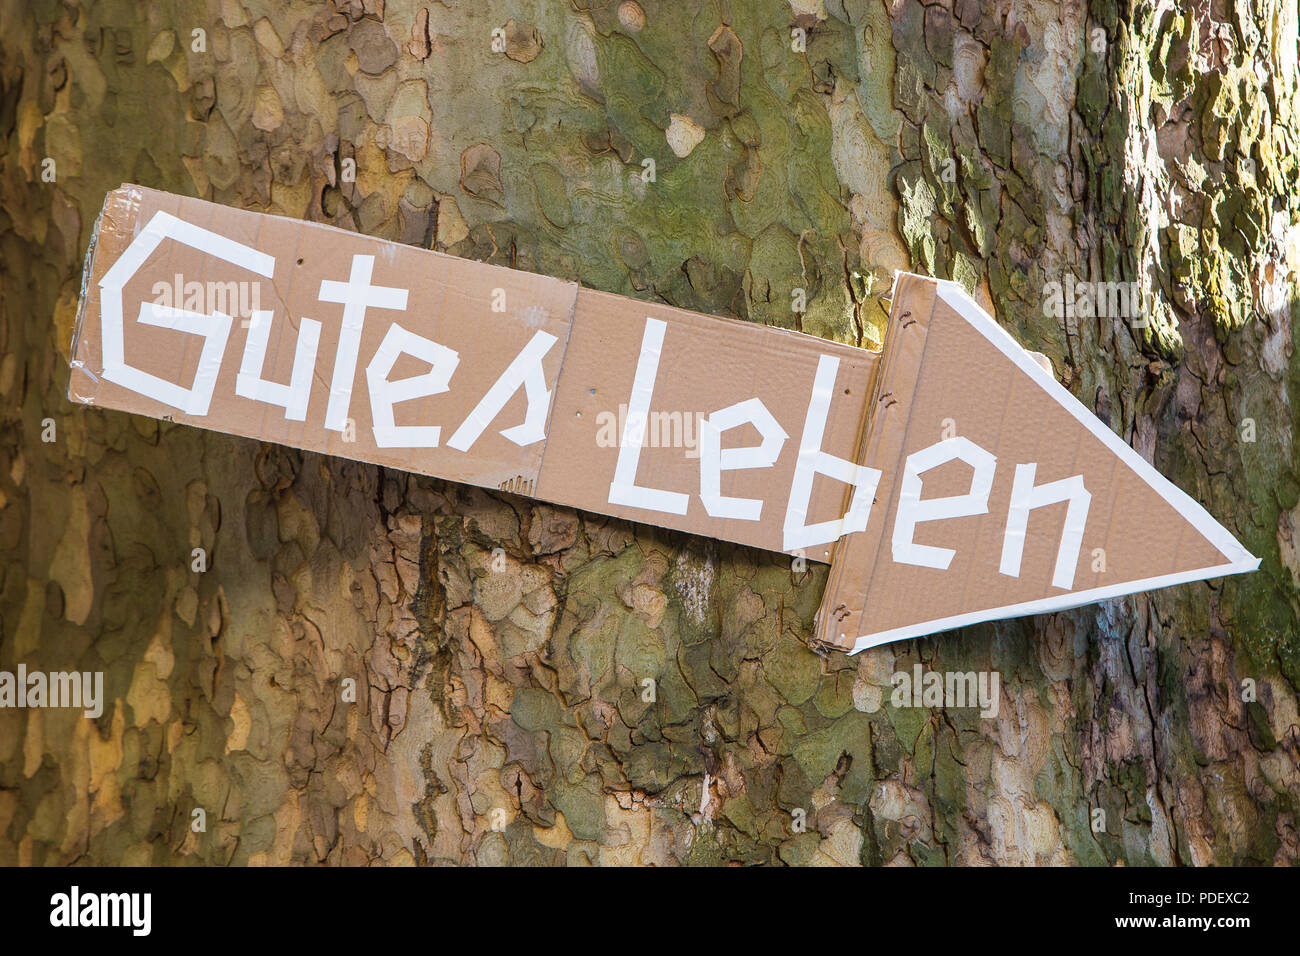 Day of the good life: Arrow on a plane tree shows the way towards Stock Photo